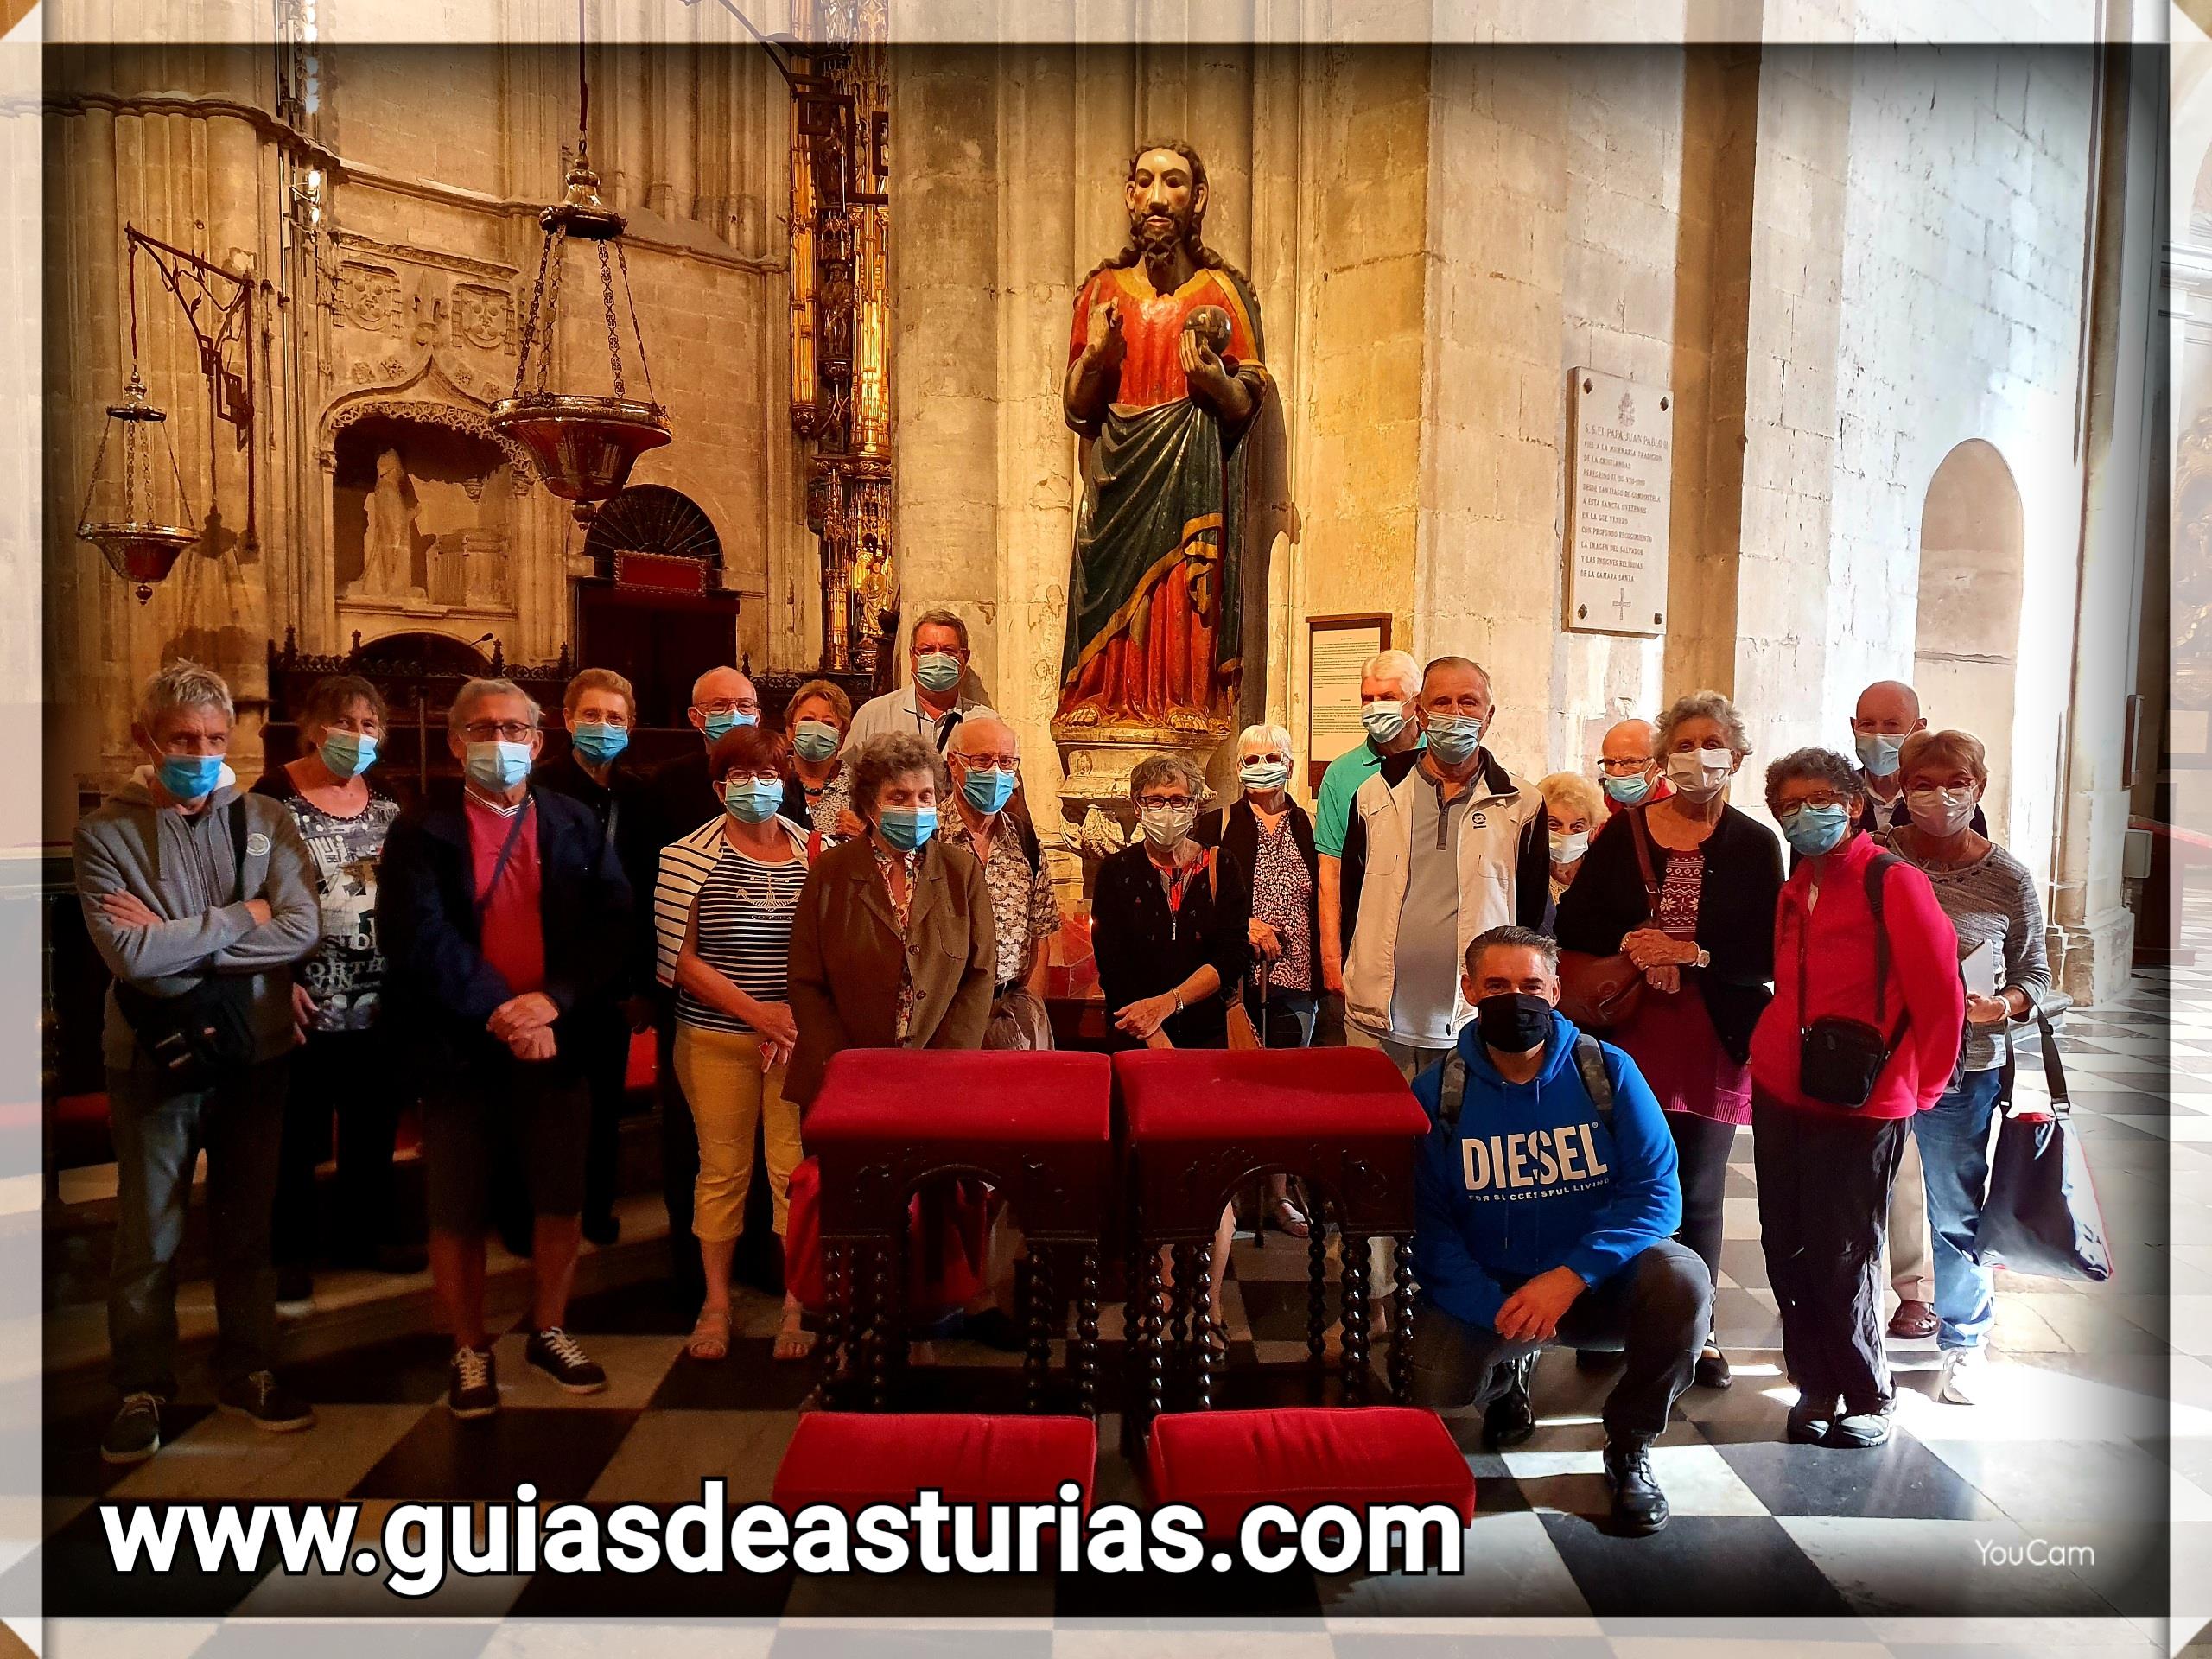 The Best of Oviedo Private Tour with Tickets